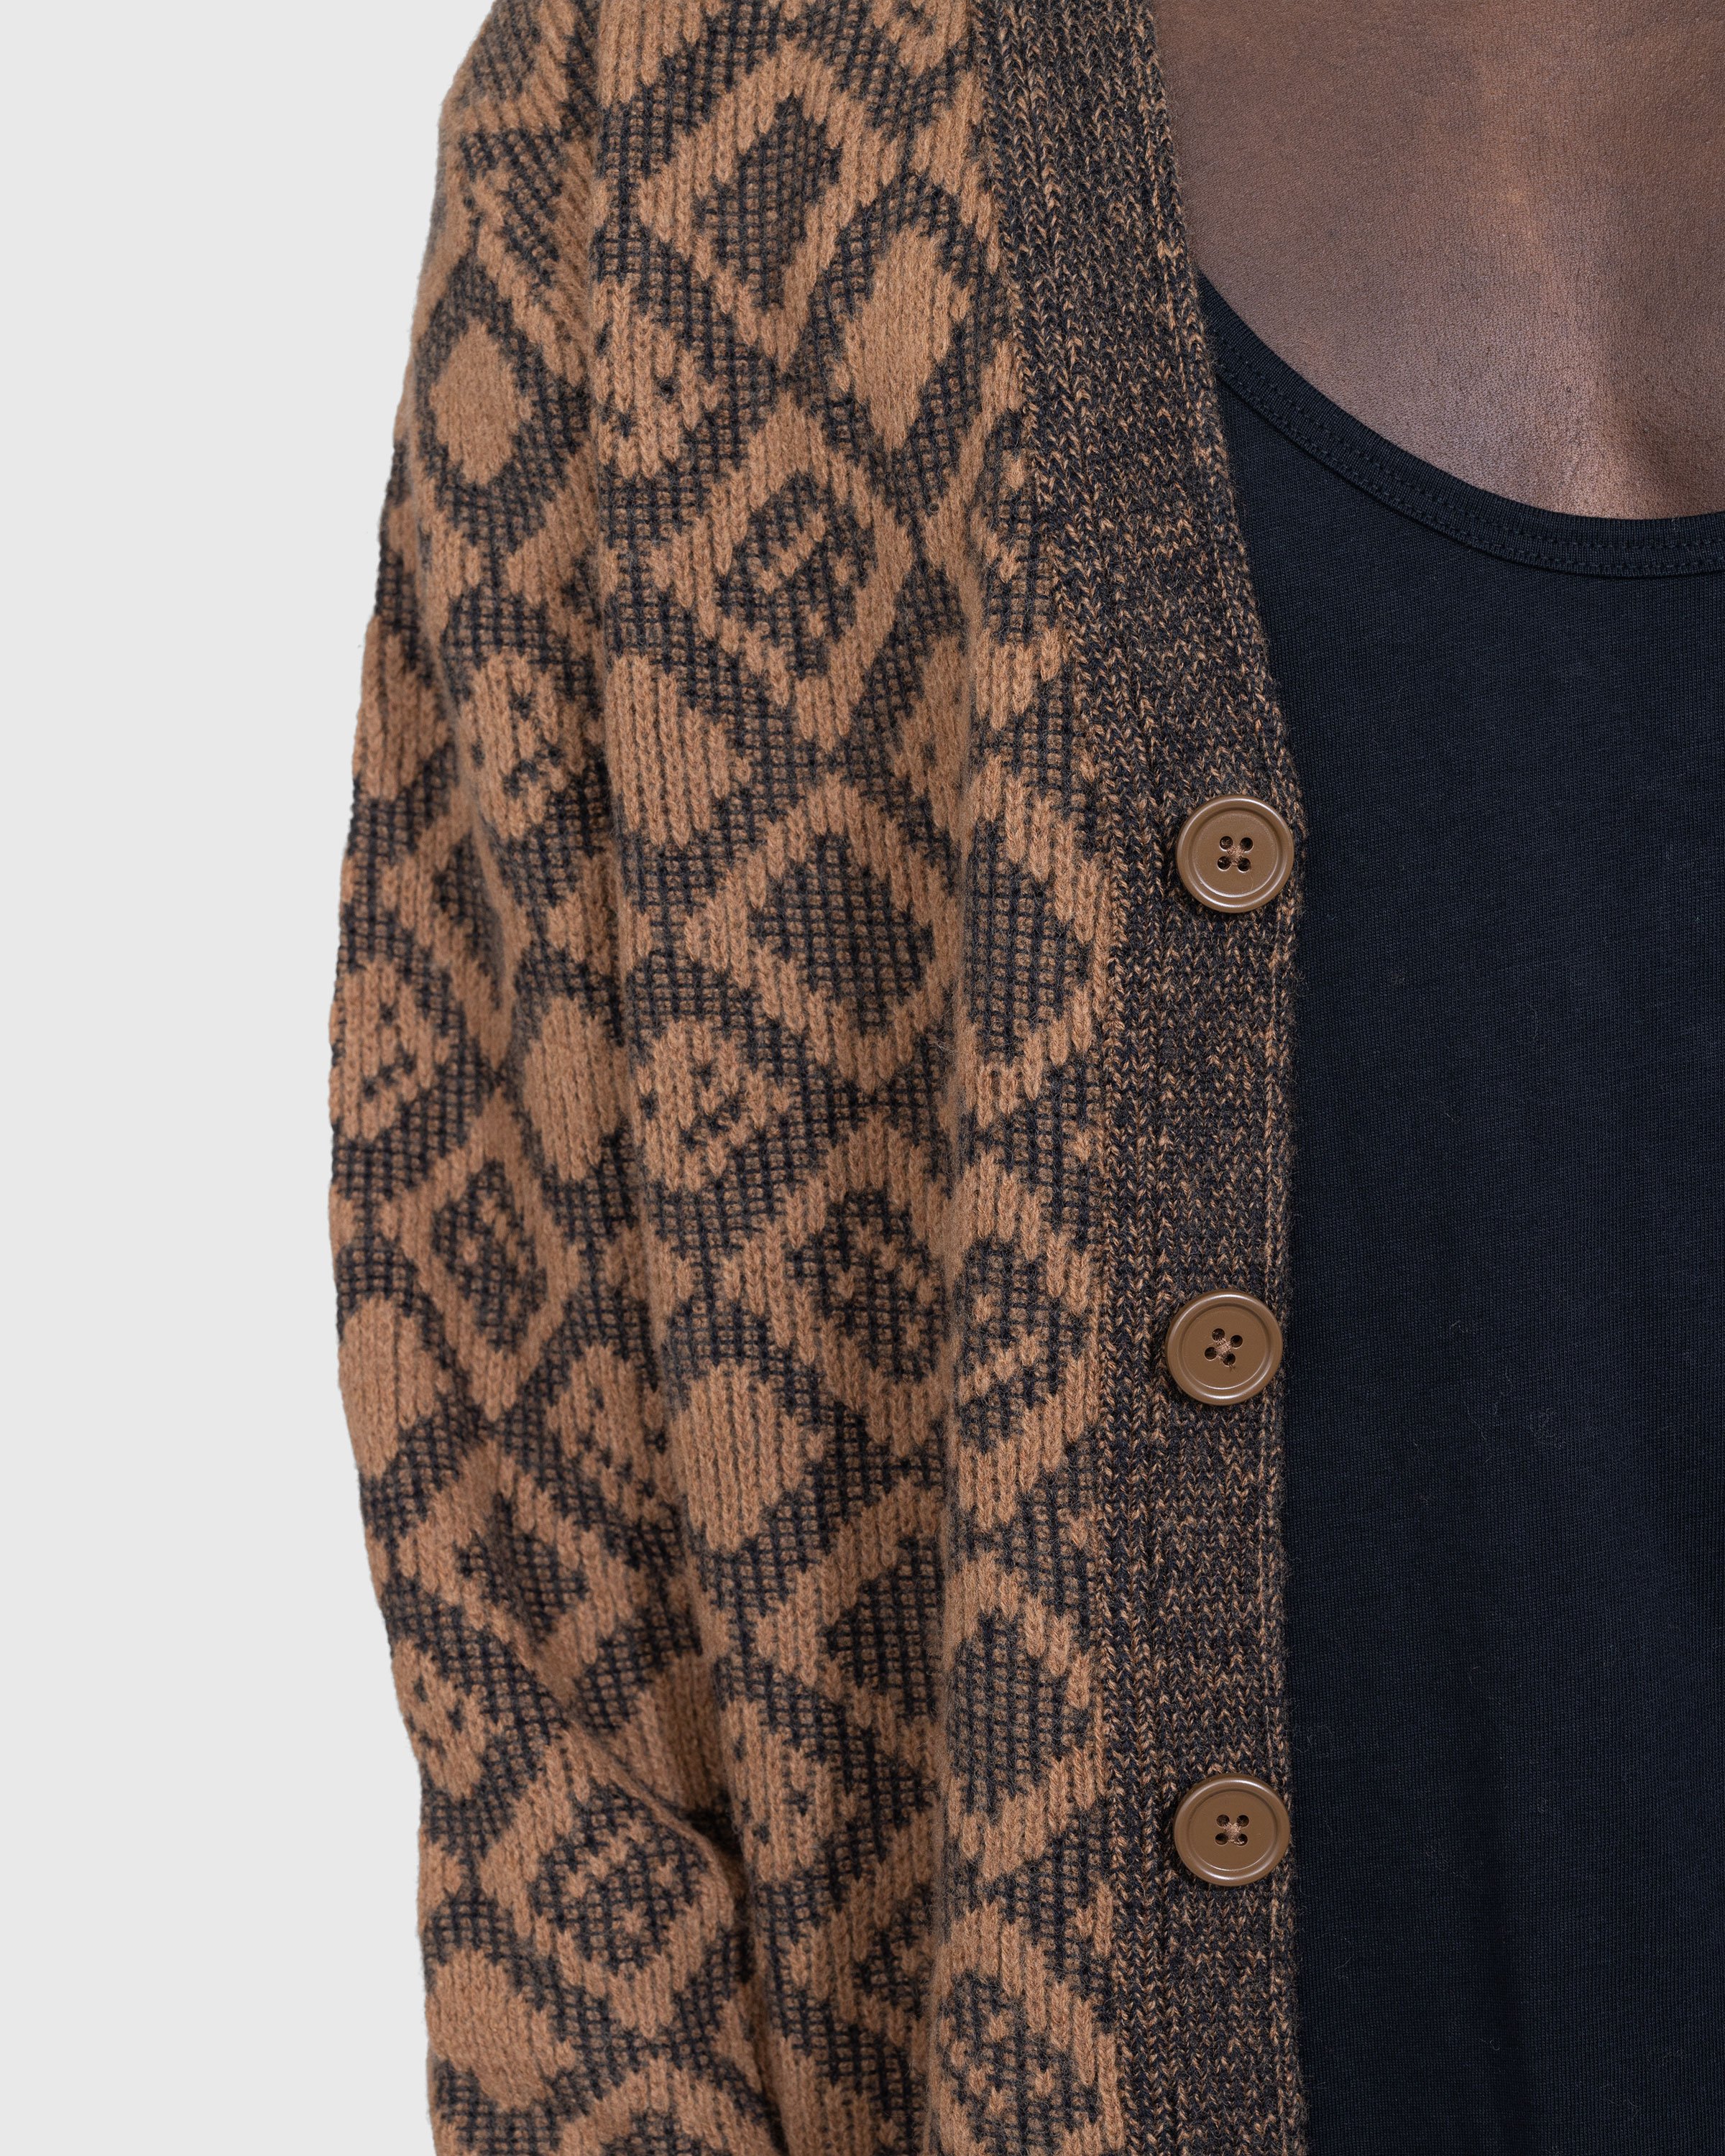 Acne Studios - face Tiles Cardigan Toffee Brown - Clothing - Brown - Image 4